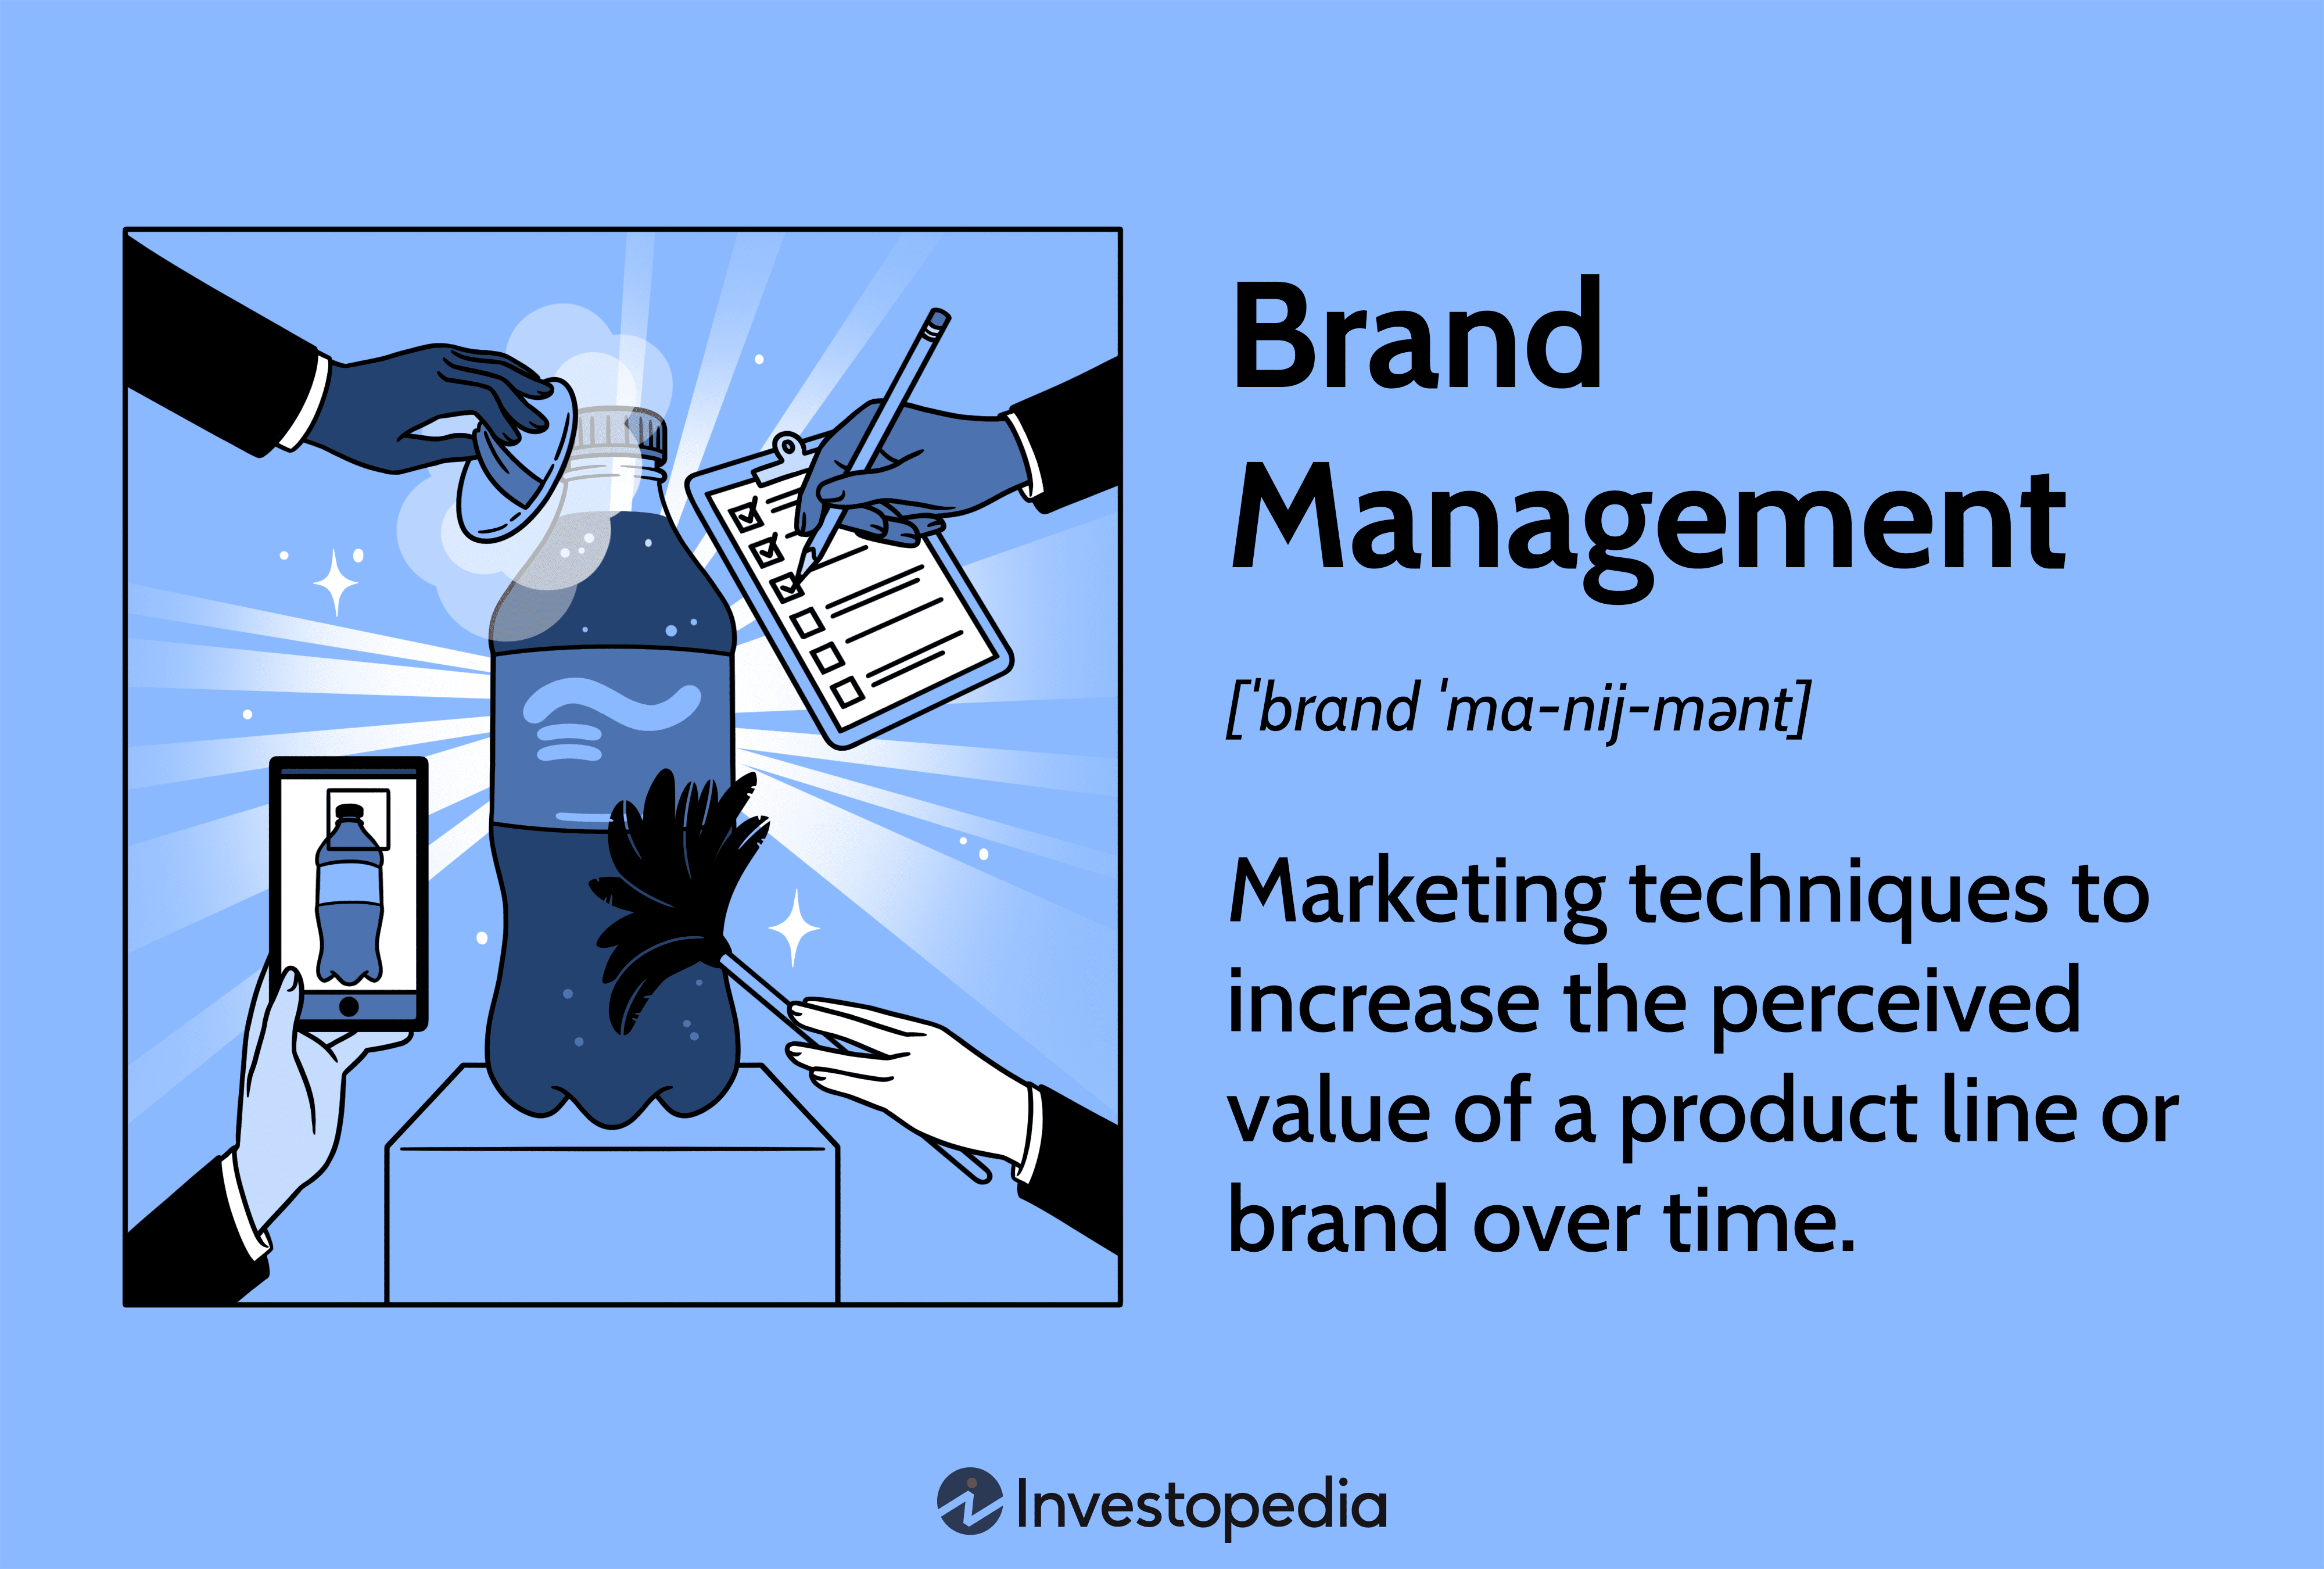 Brand Management: Marketing techniques to increase the perceived value of a product line or brand over time.